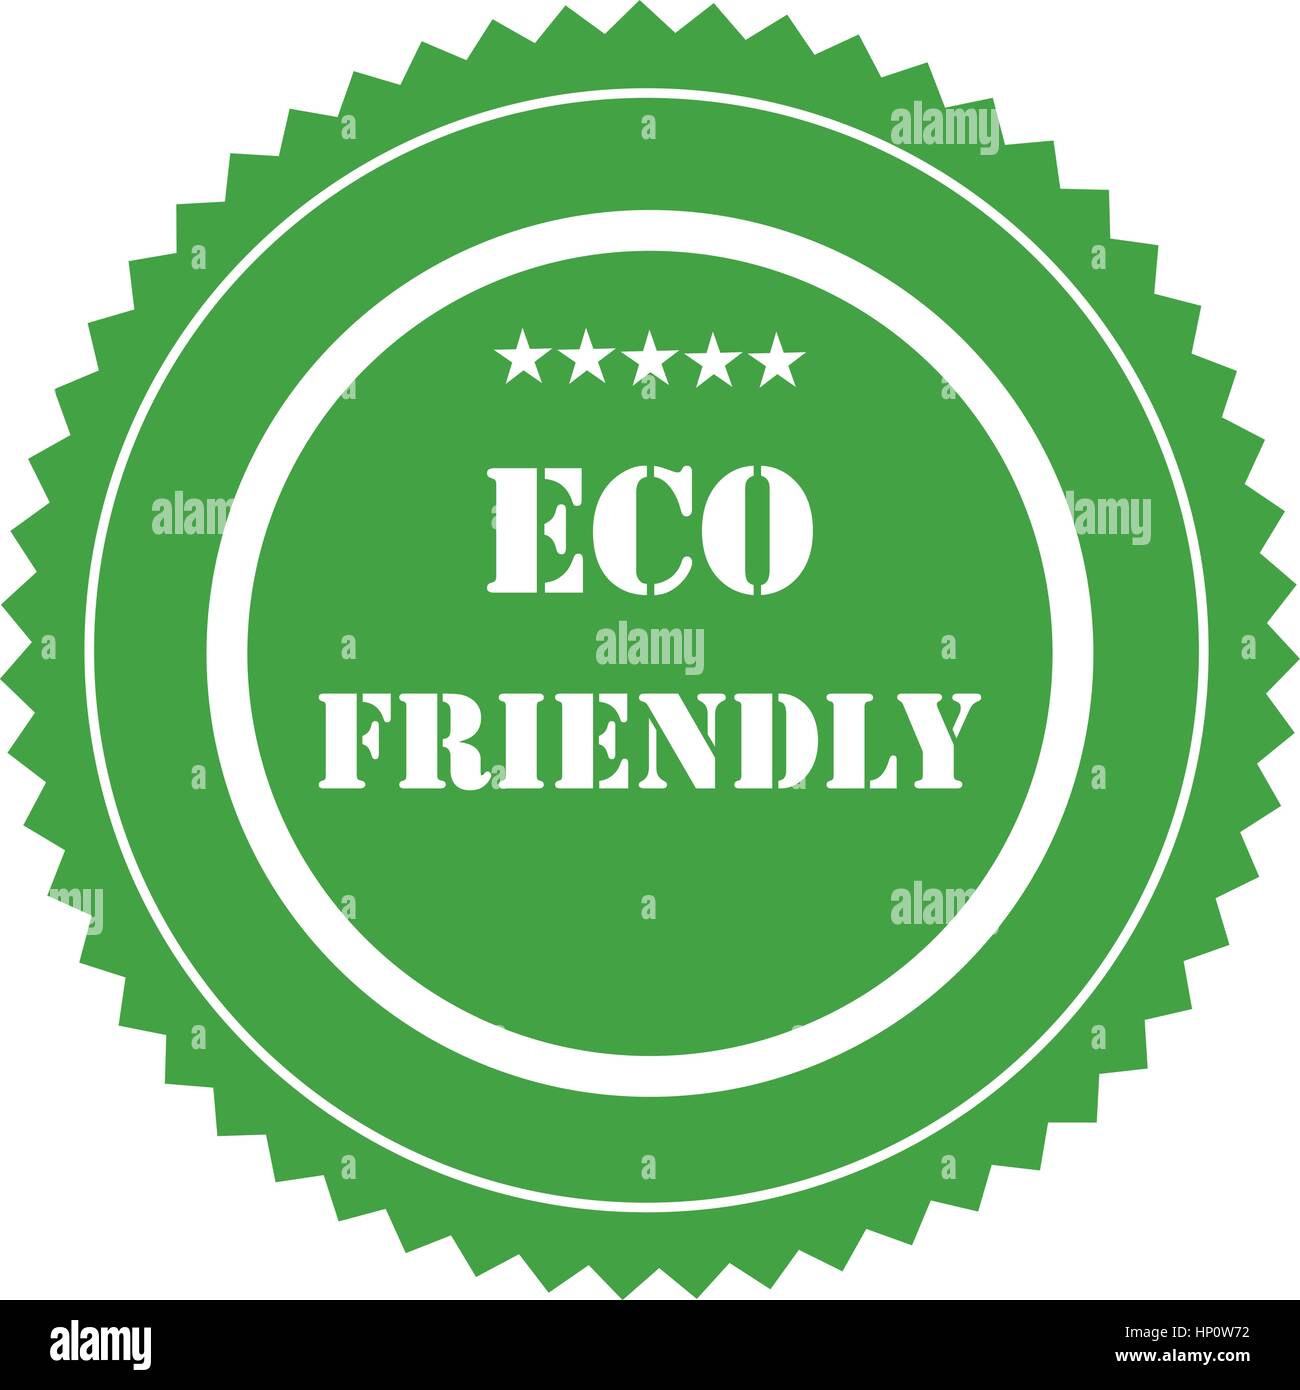 Eco friendly sign, stamp, logo, icon, badge. Green label for eco friendly product. Eco product sticker.Guarantee or certificate for ecological product Stock Vector